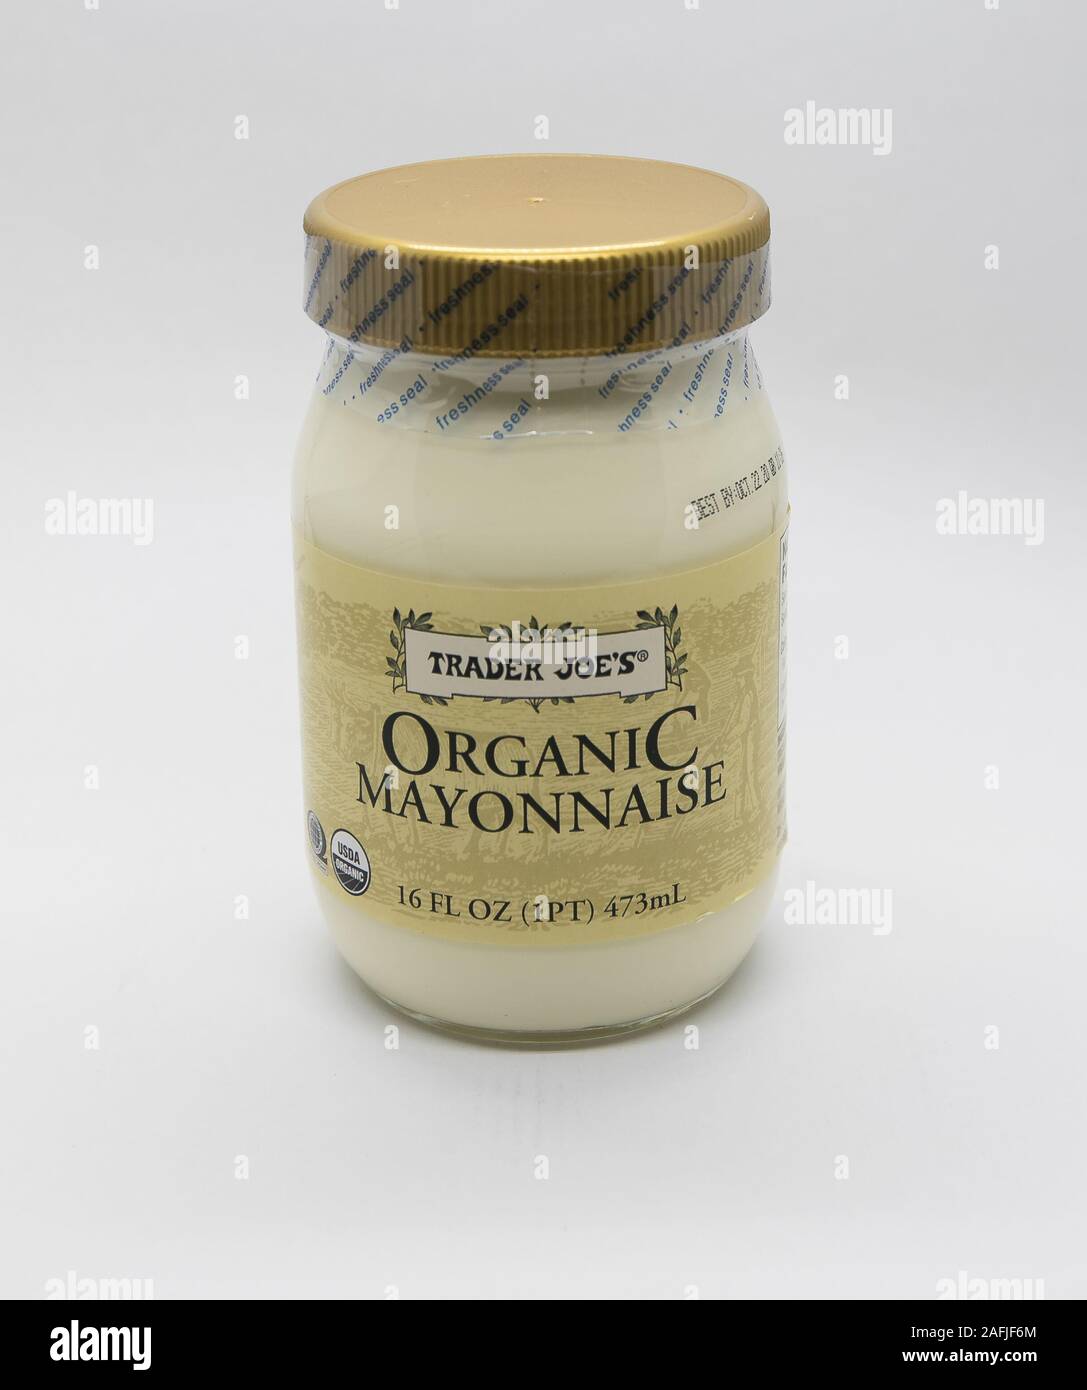 New York, 12/8/2019: Jar of Trader Joe's organic mayonnaise stands against white background. Stock Photo